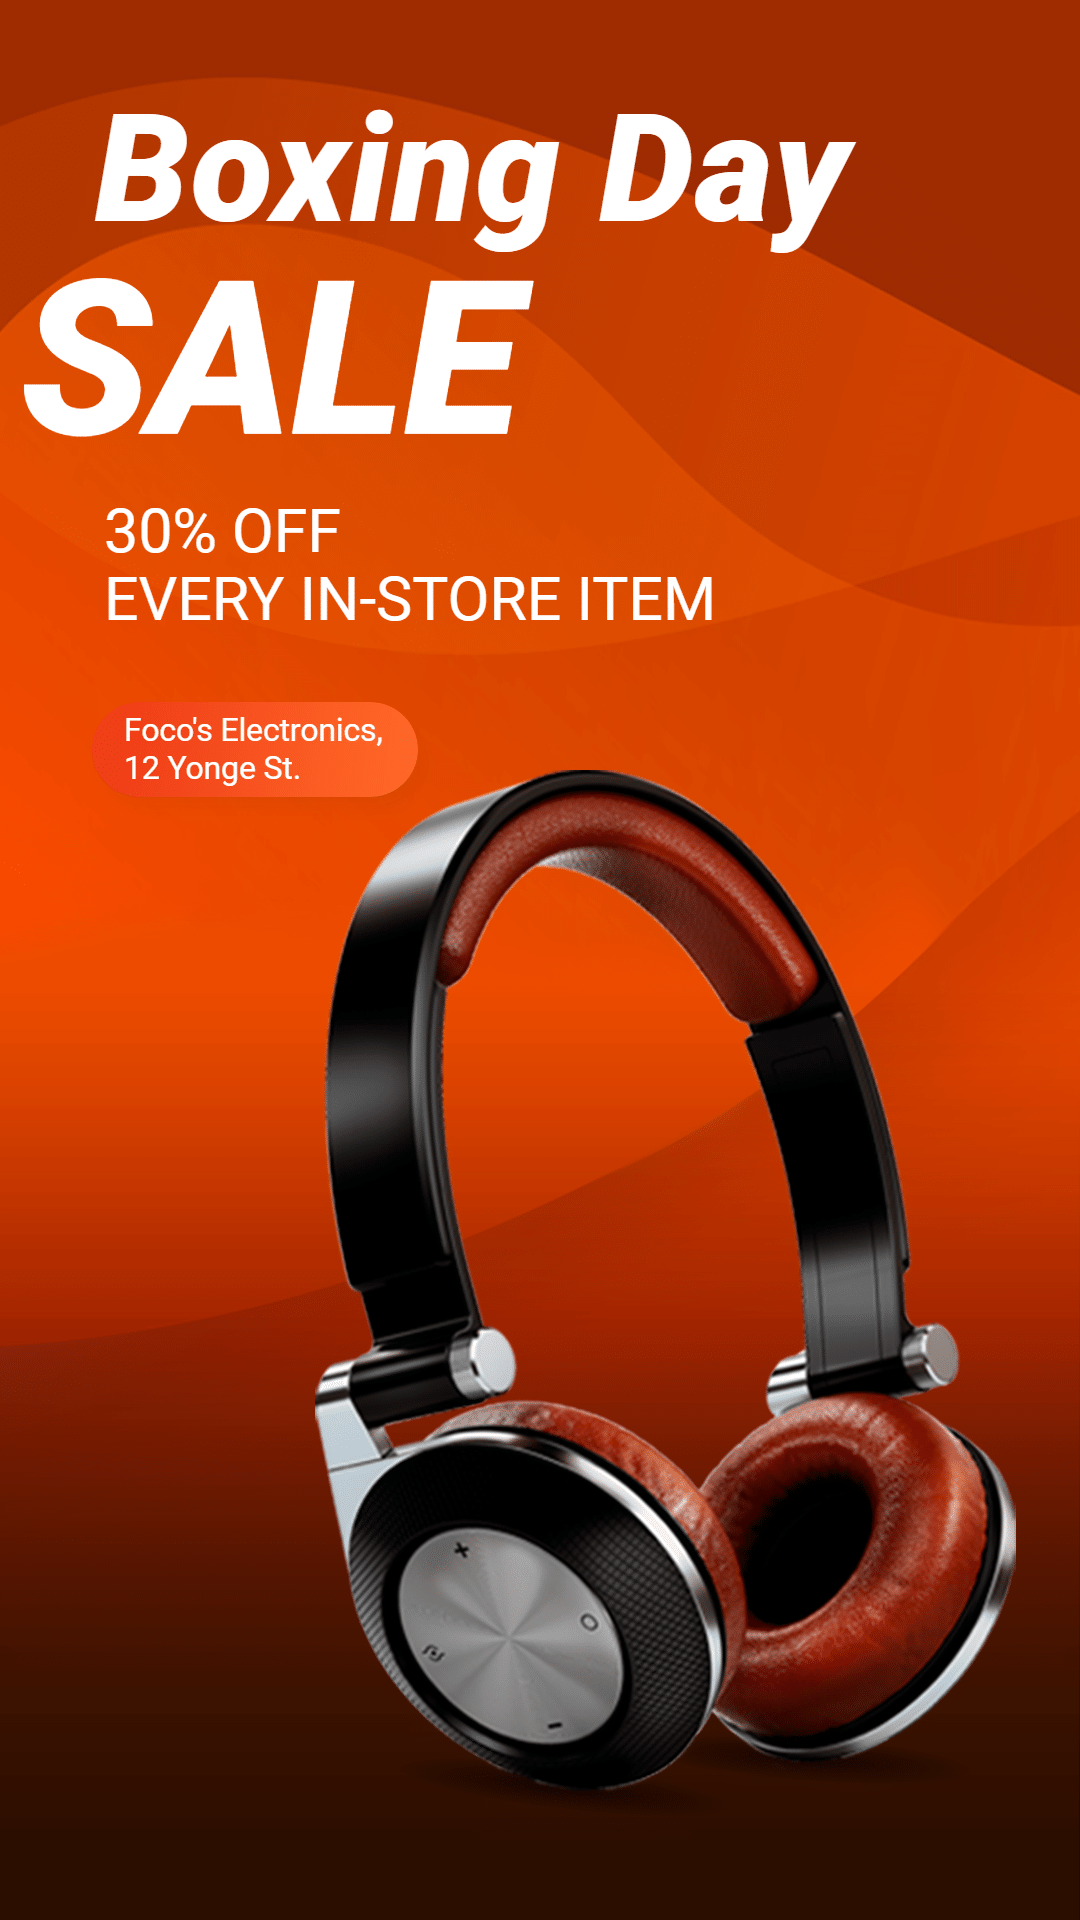 Red Color Block Fashion Headphone Boxing Day Sale Ecommerce Story预览效果